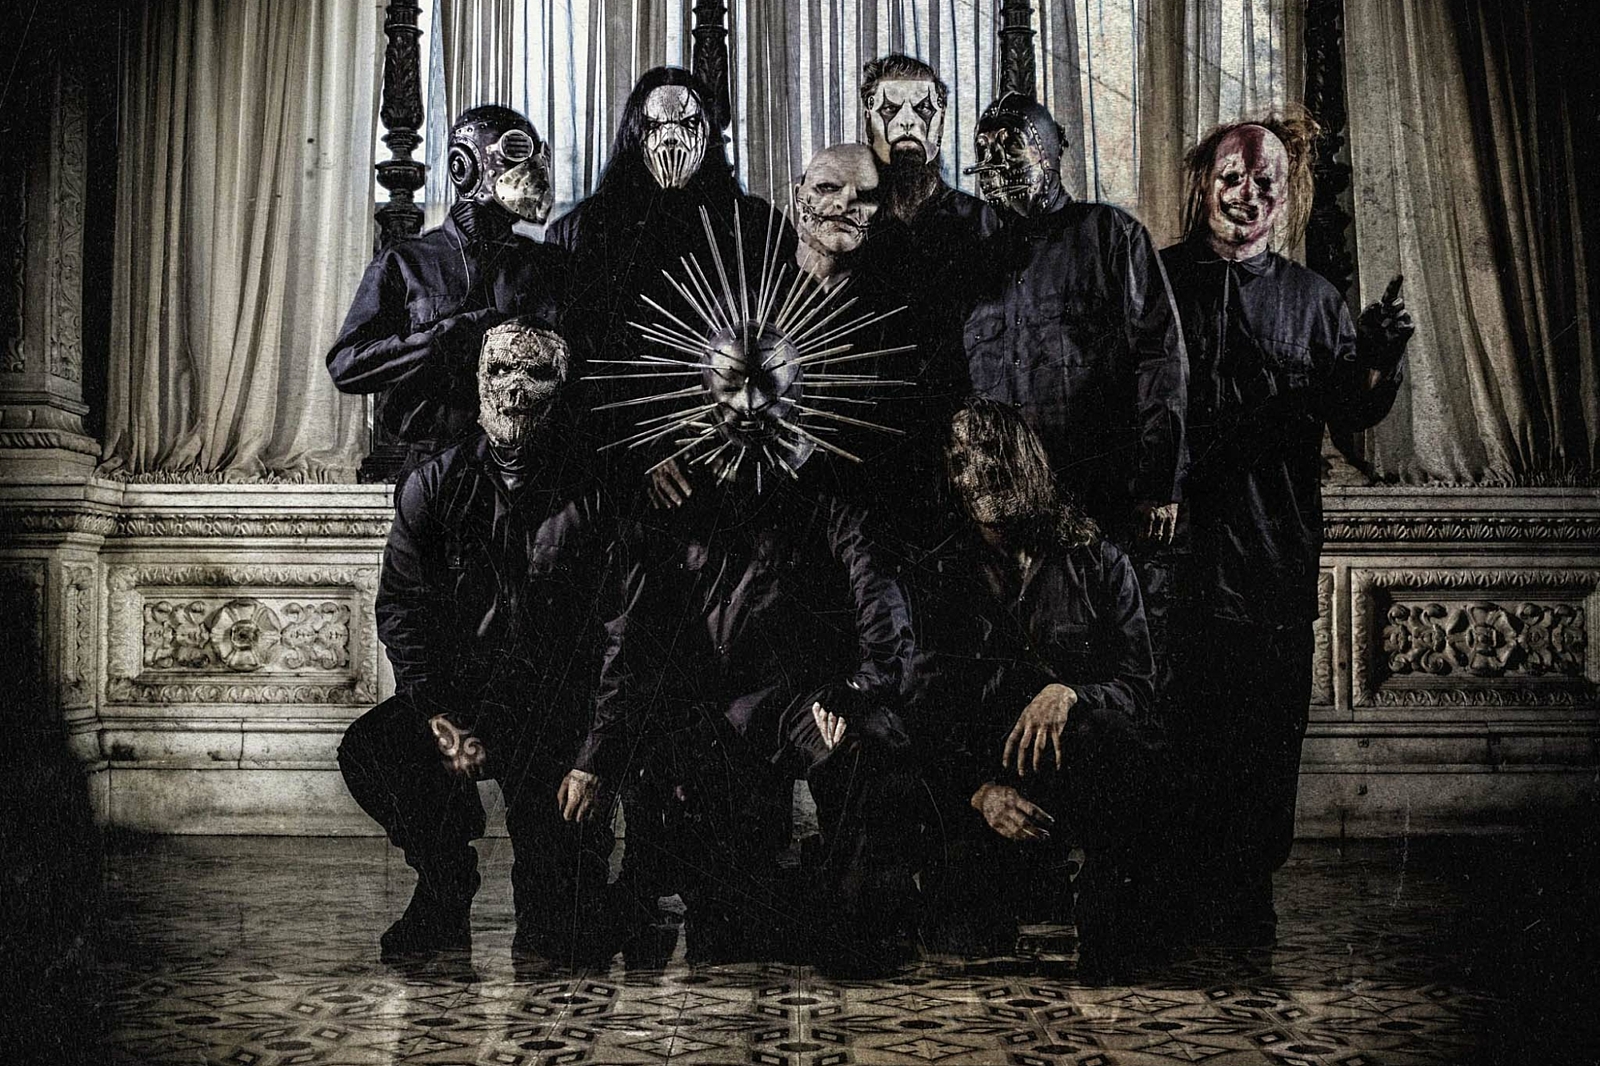 Slipknot: "We needed the time to grieve"